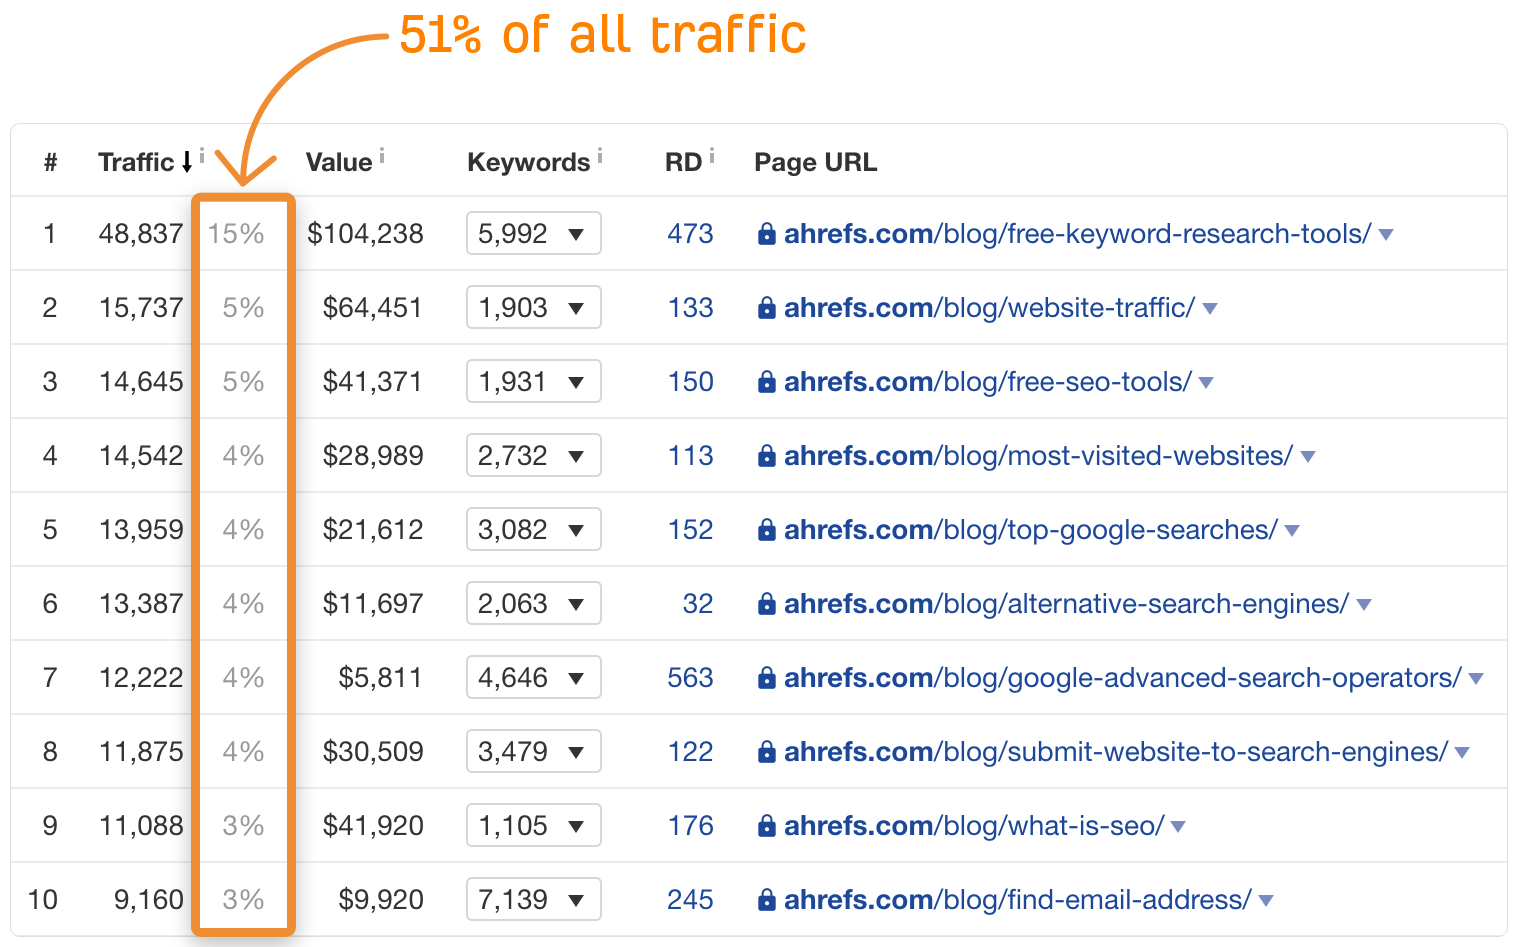 10 pages with most traffic